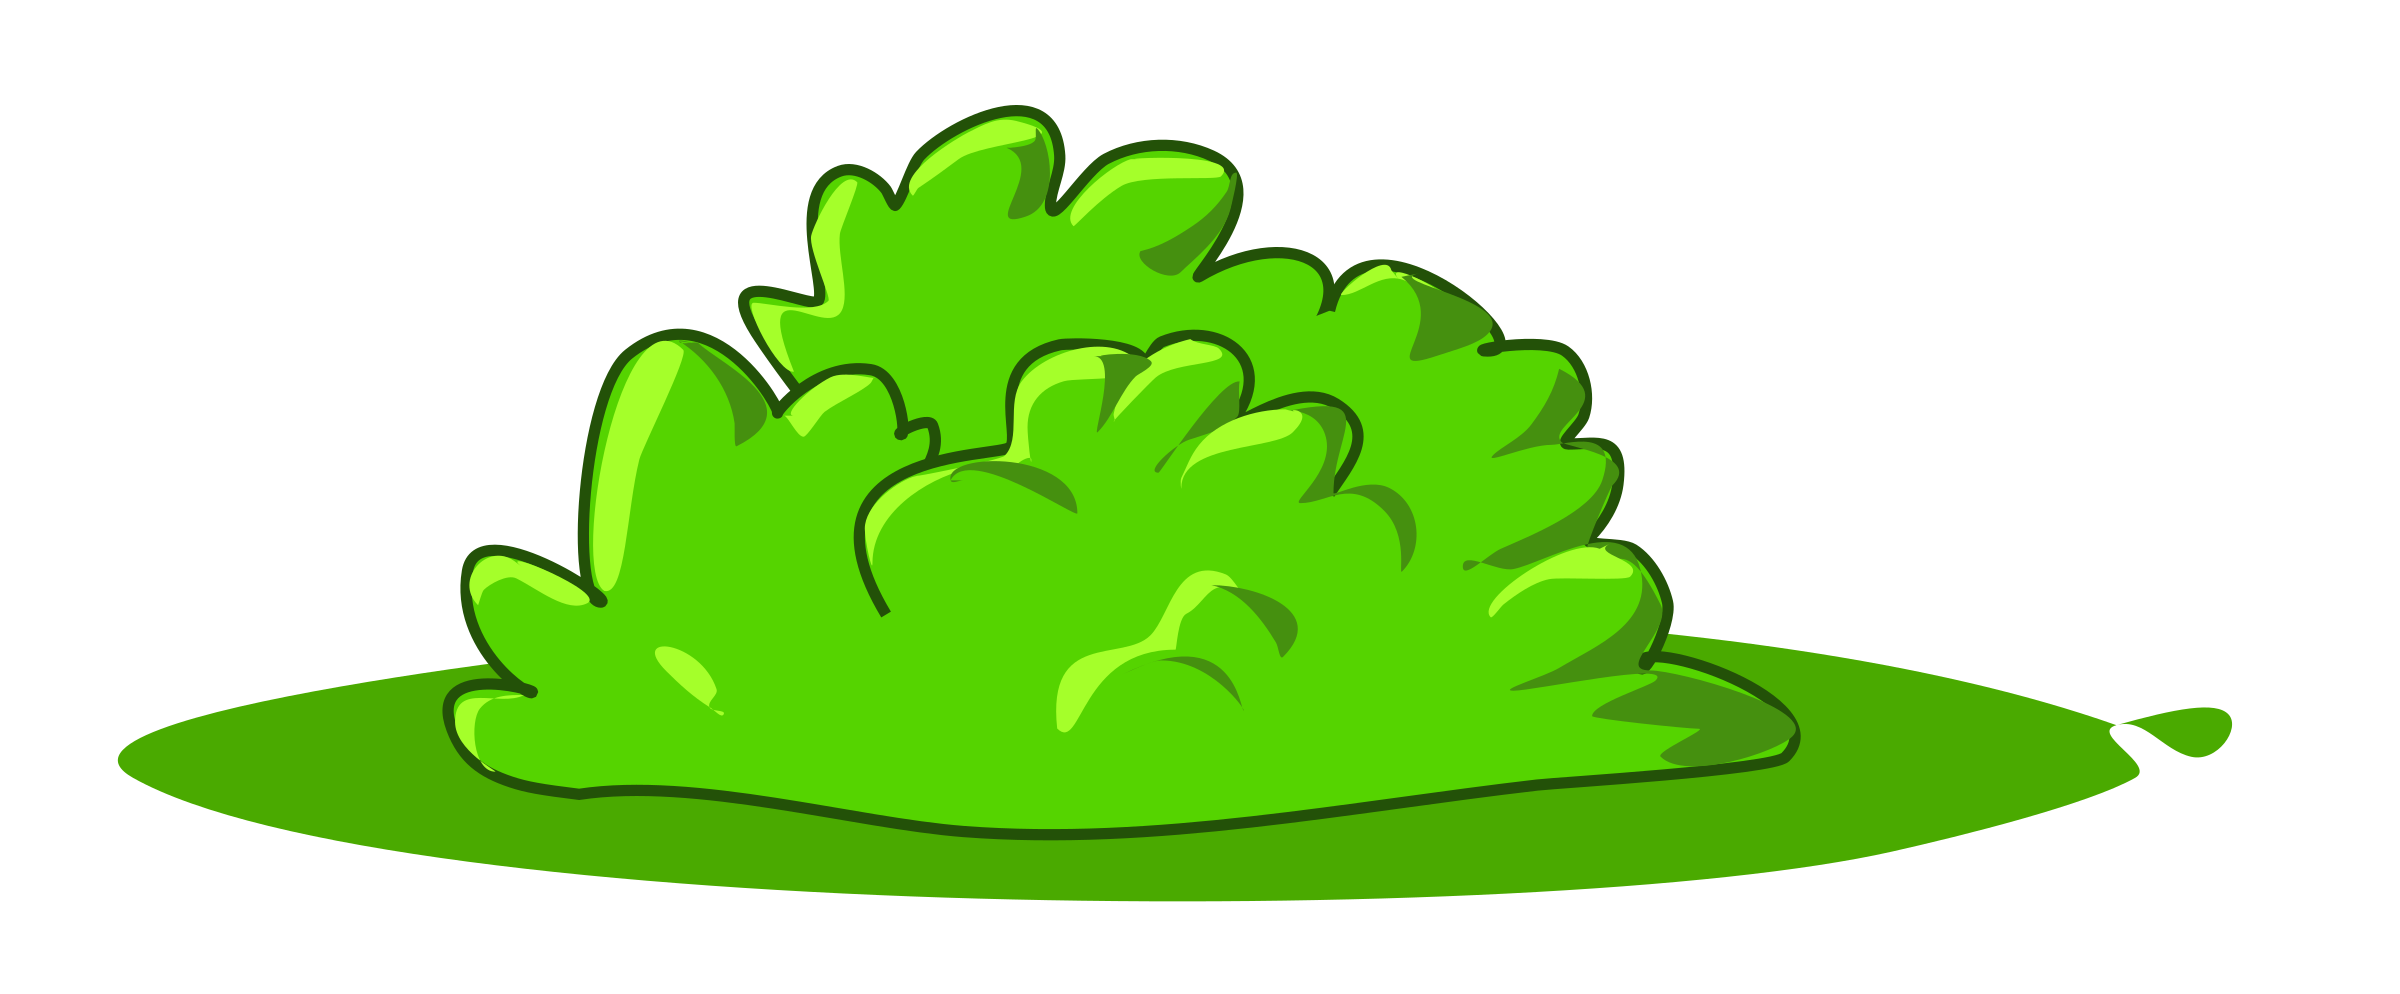 Bushes clipart comic, Bushes comic Transparent FREE for download on